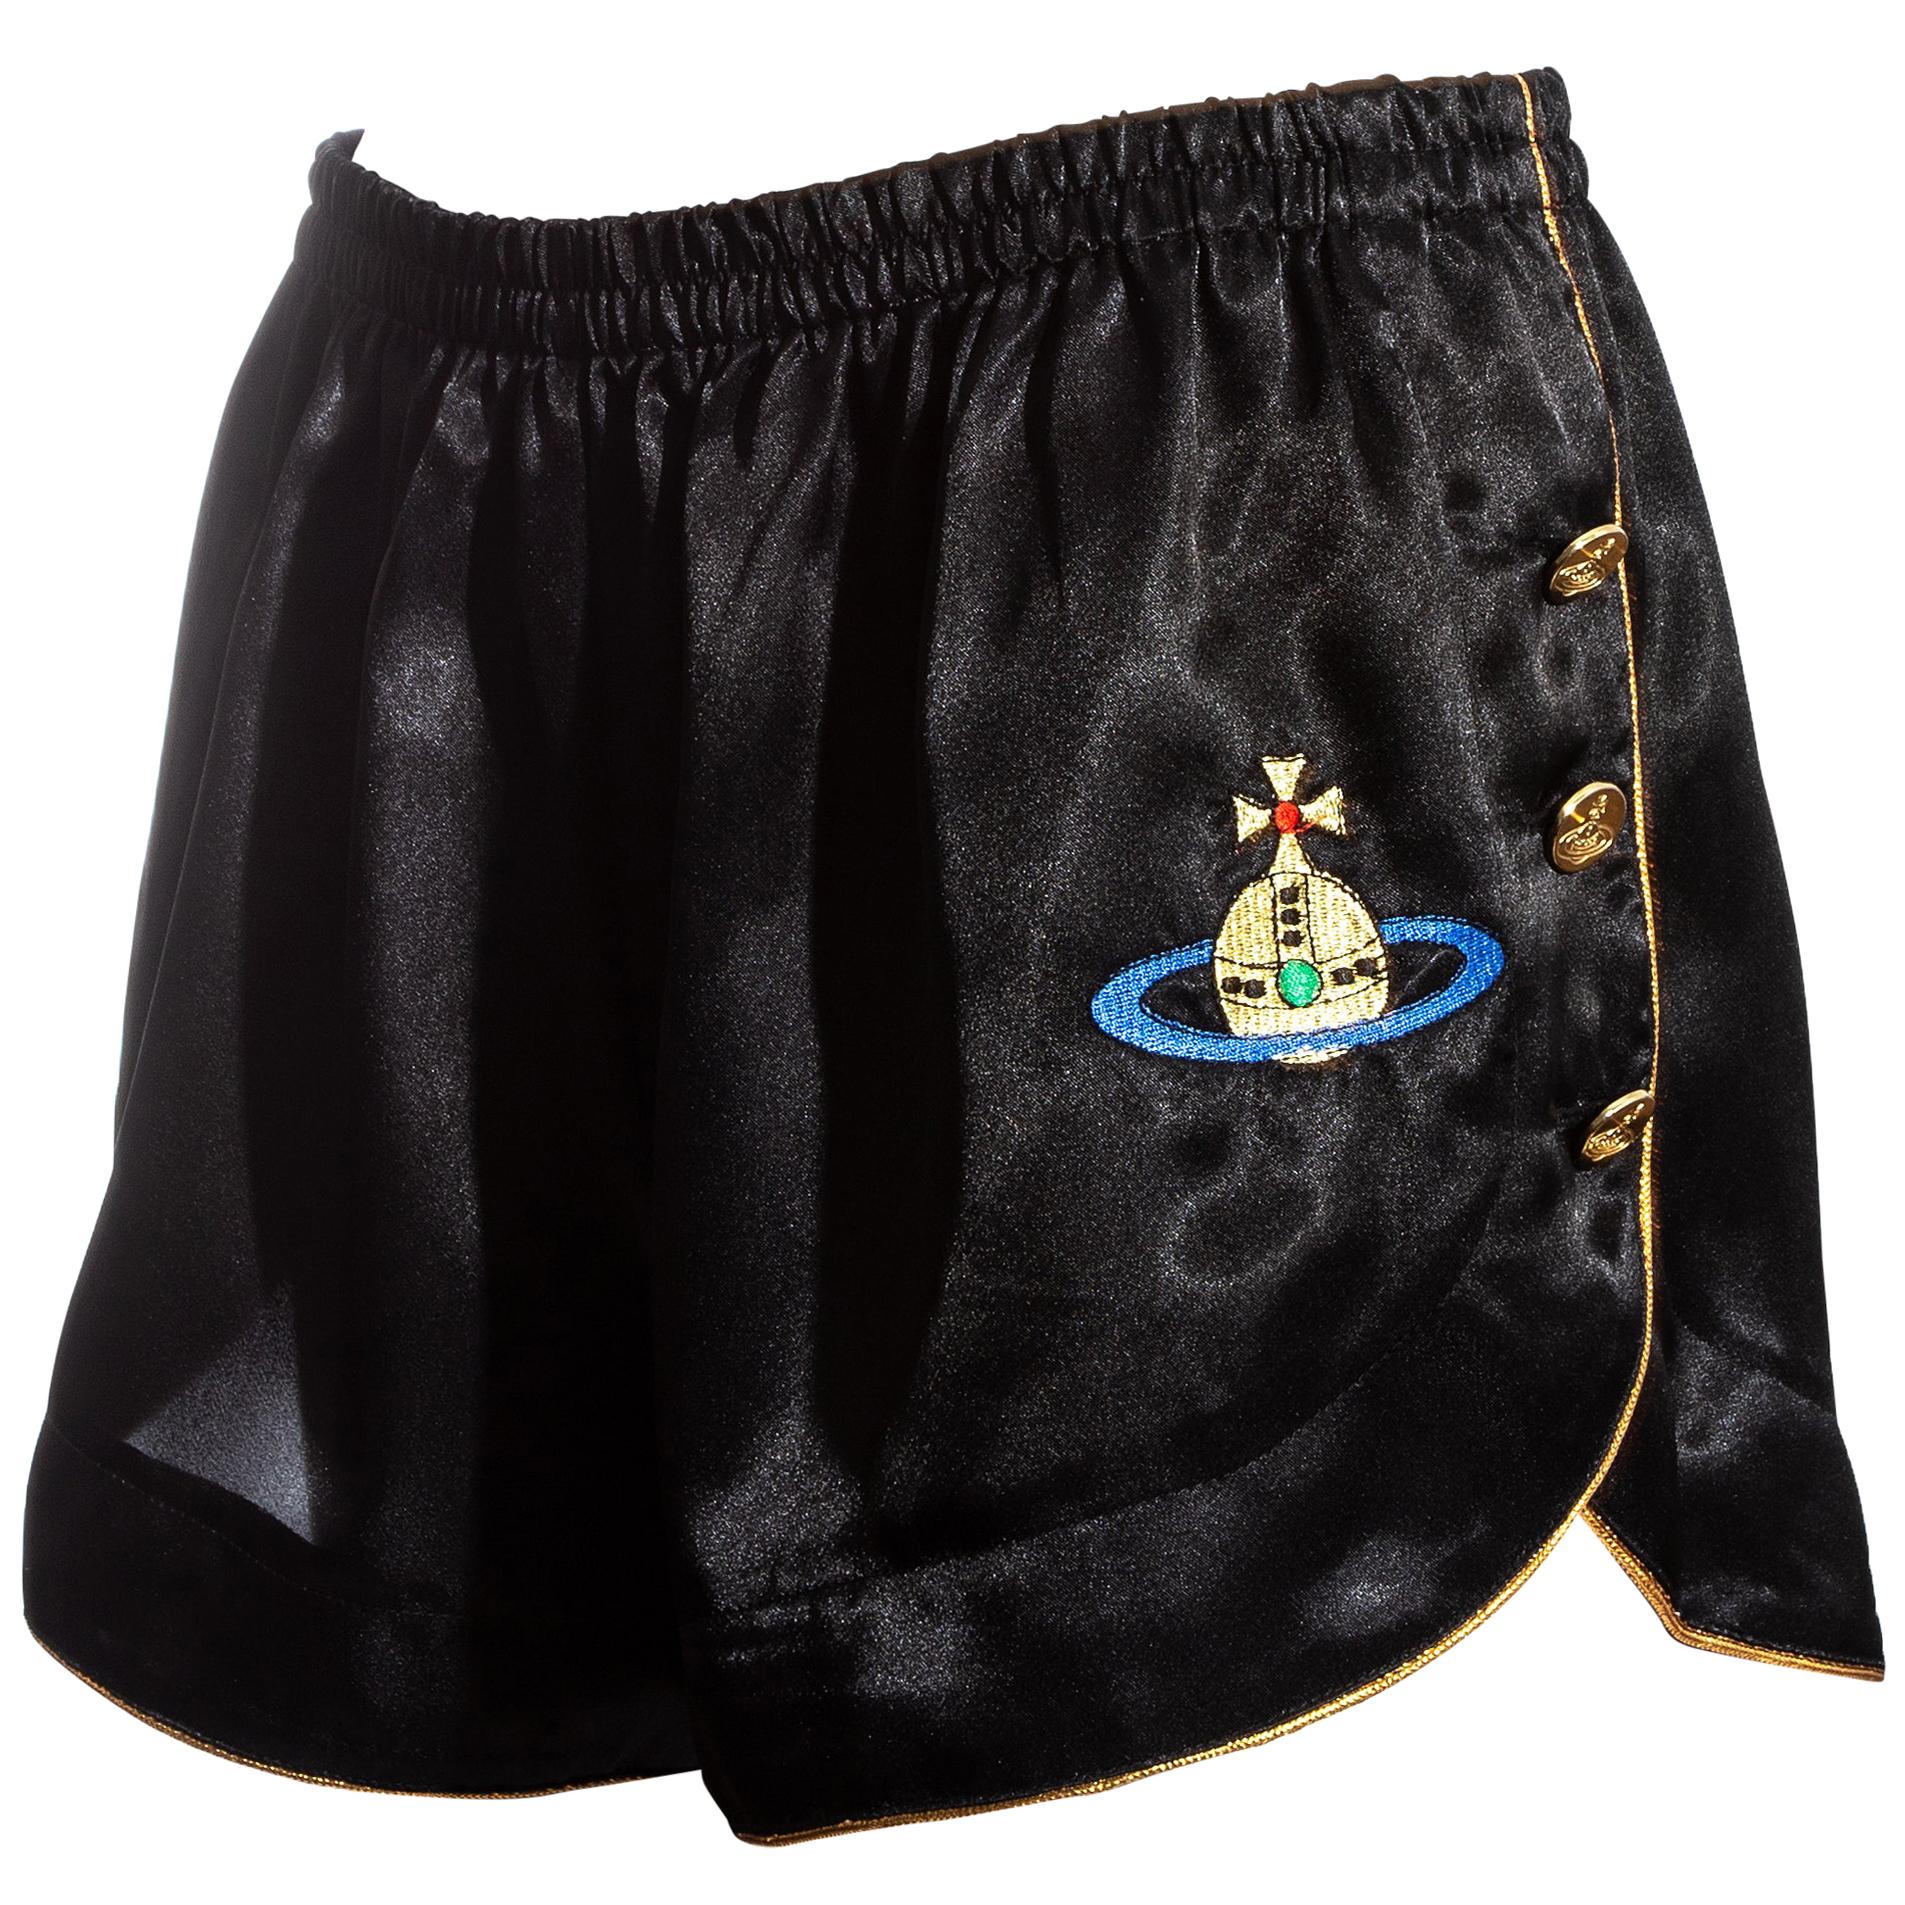 Vivienne Westwood black and gold embroidered satin mini shorts, ss 1993